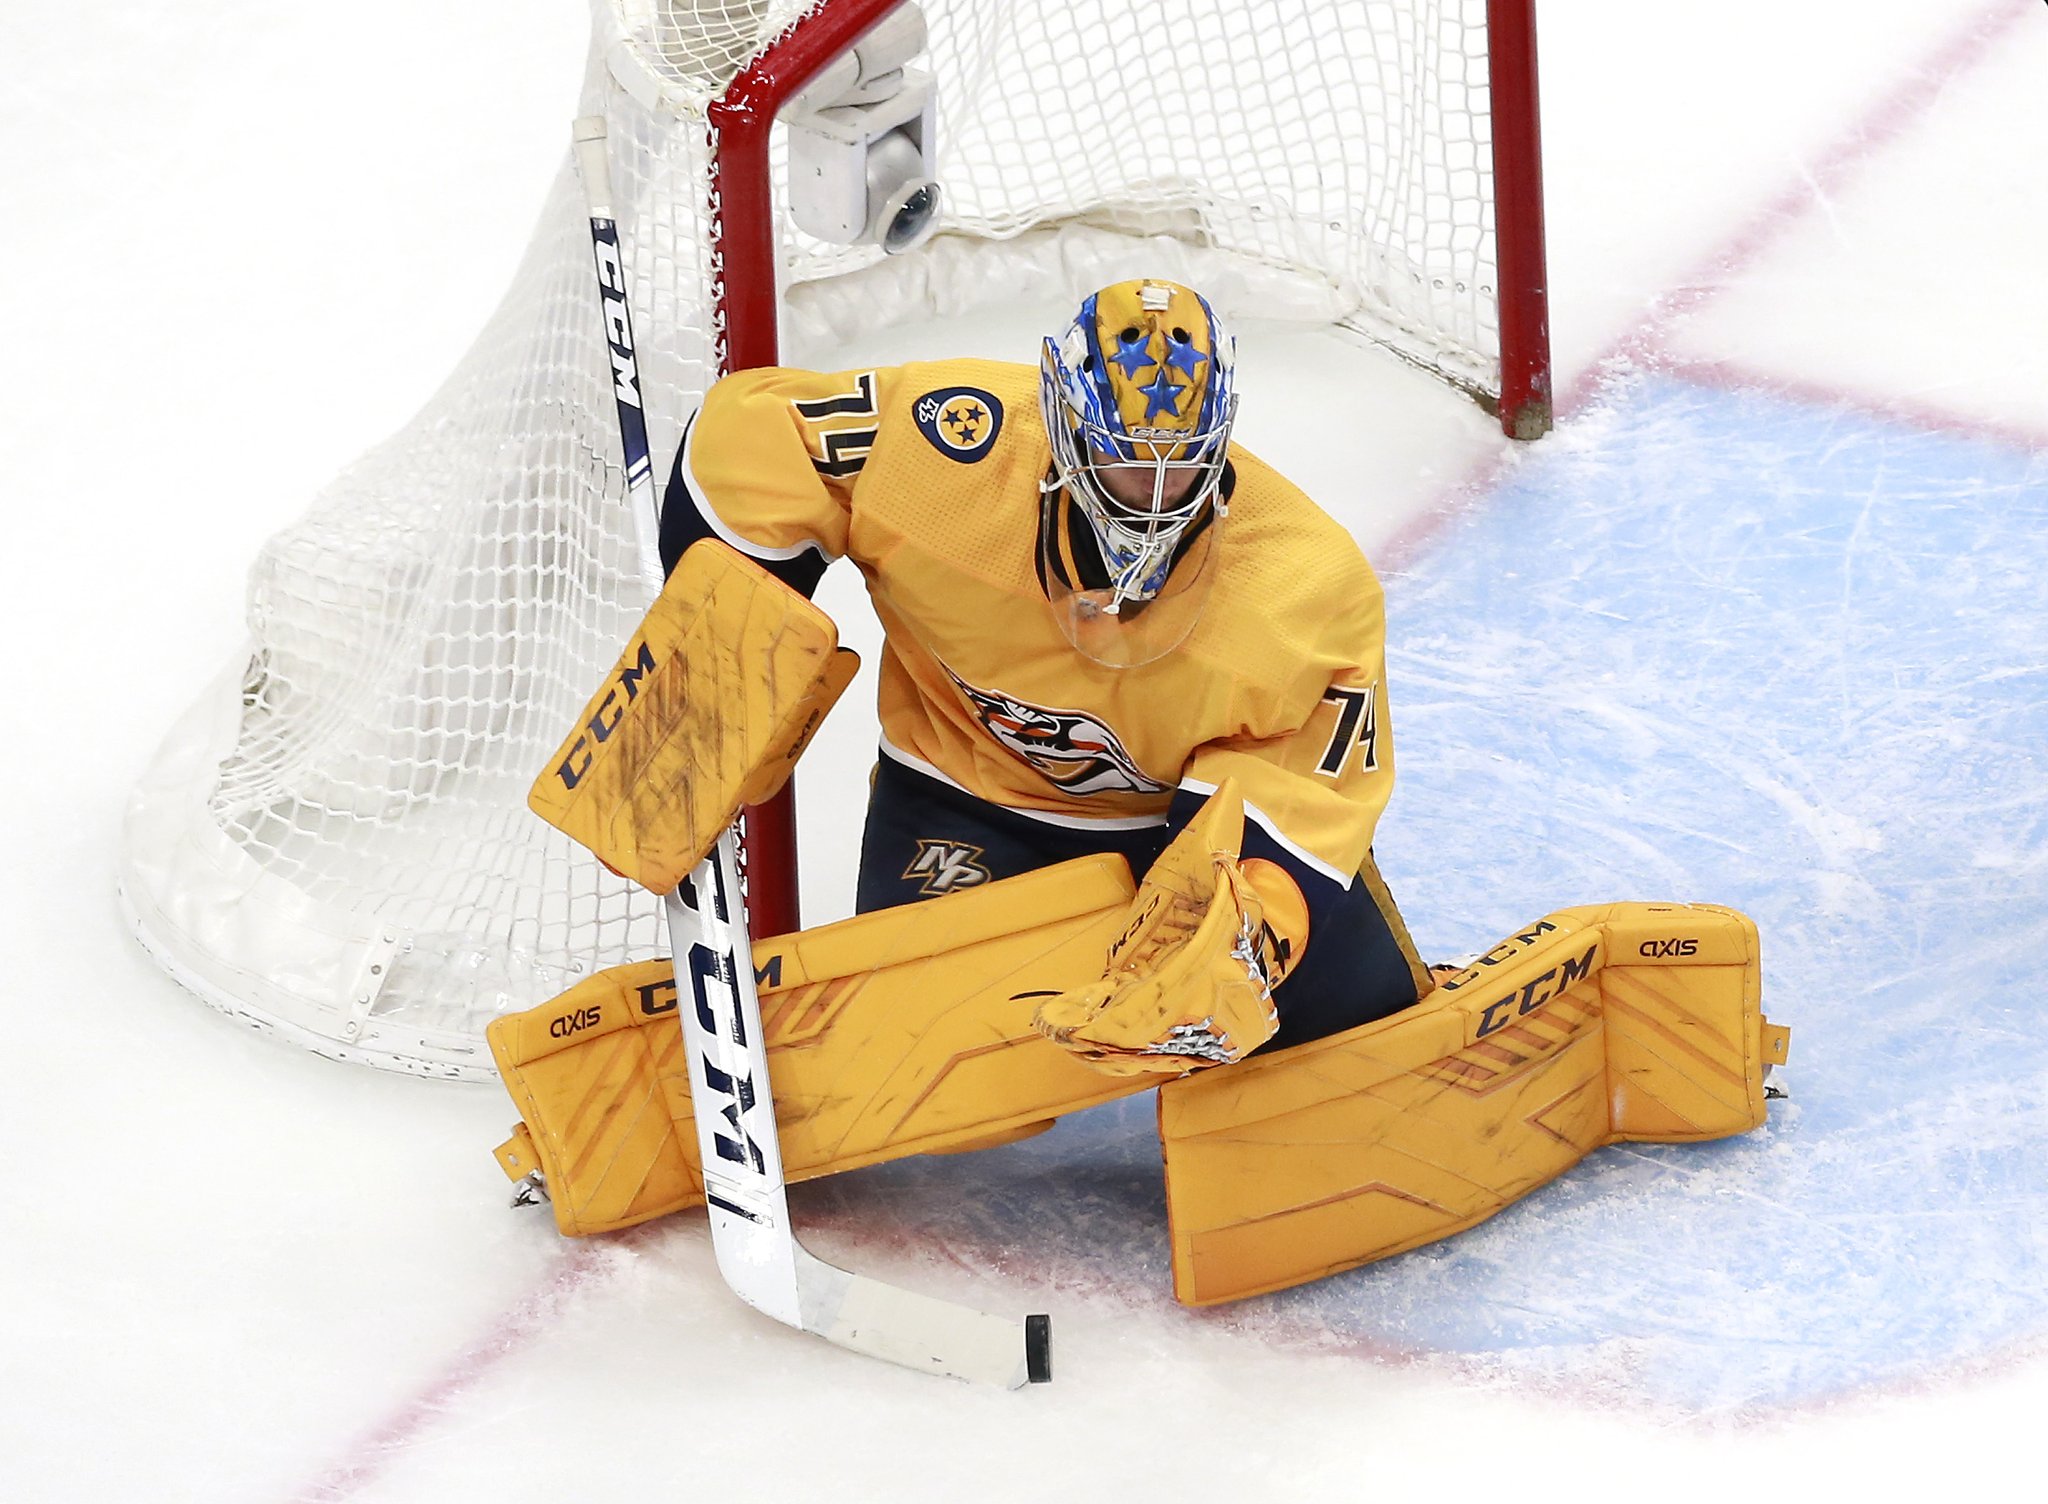 Juuse Saros rocking a new set of @ccmgoalie AXIS gear today in